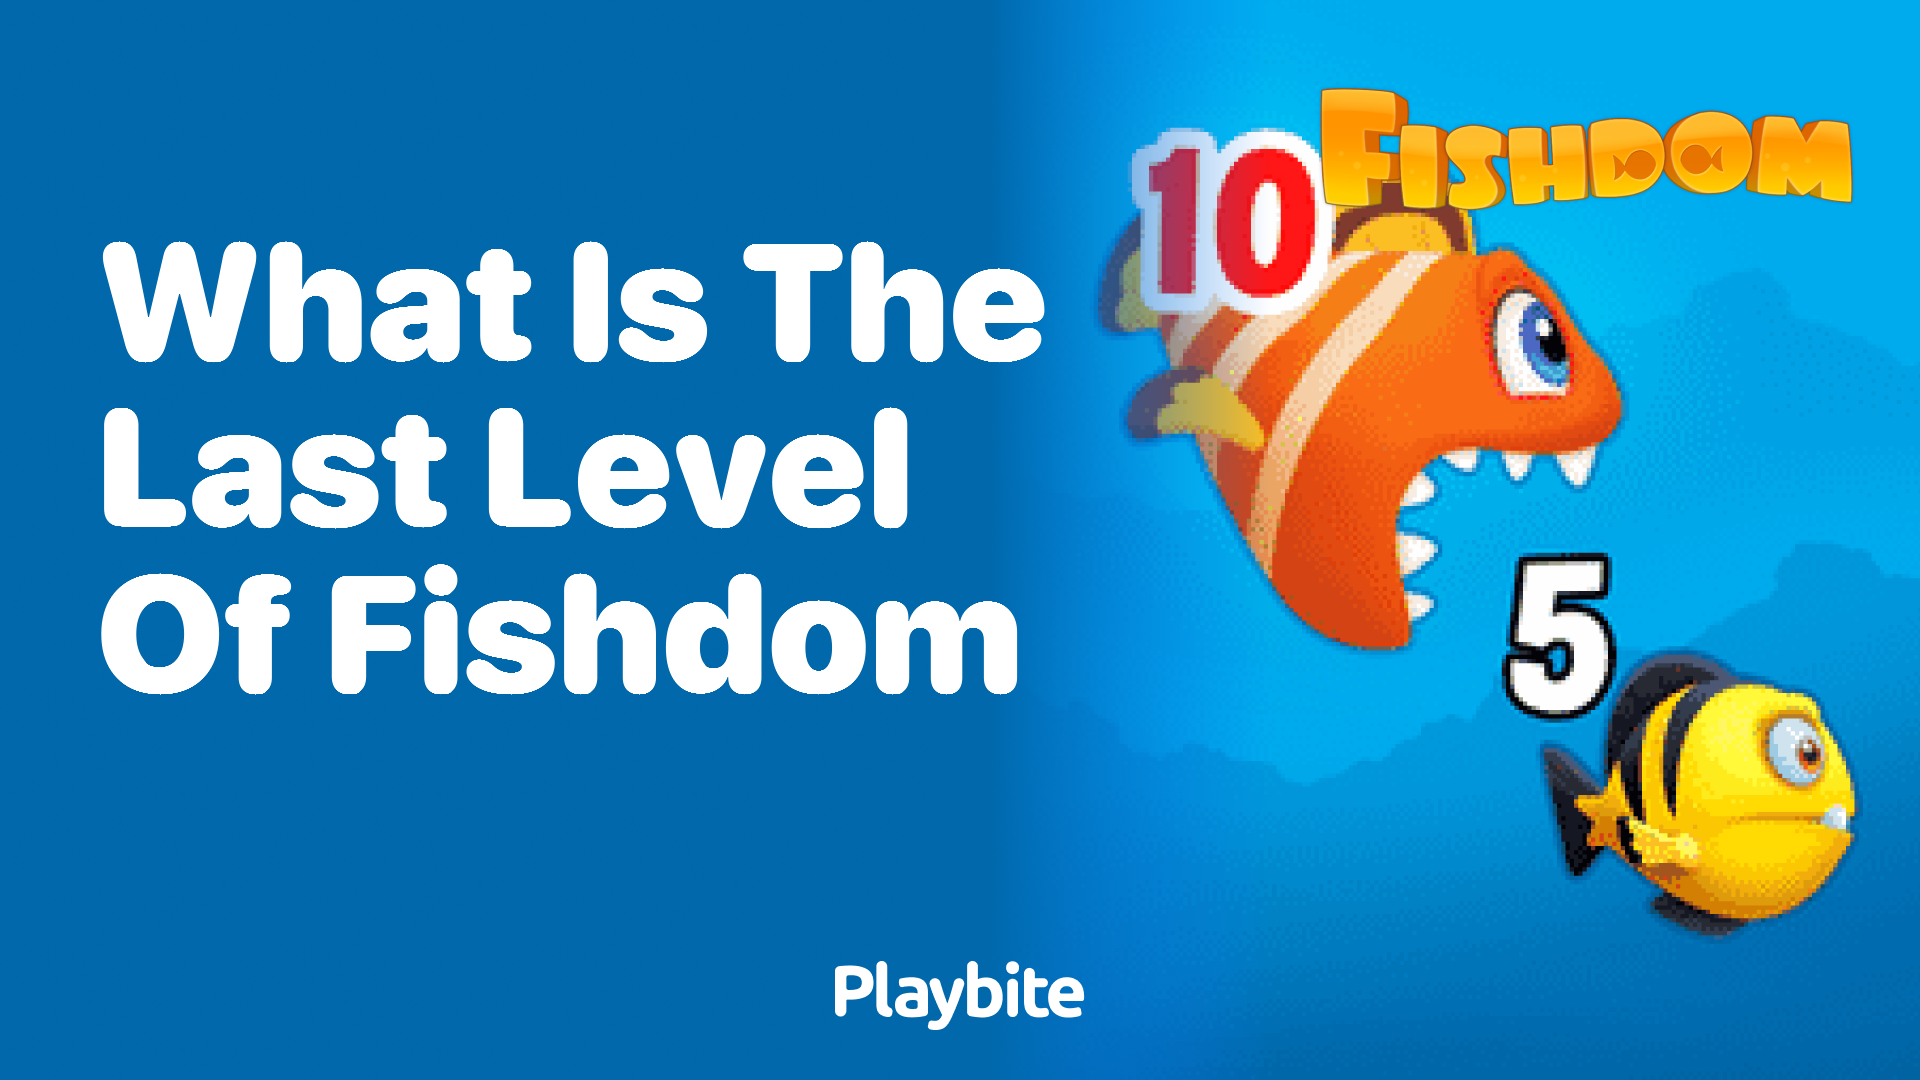 What is the Last Level of Fishdom?